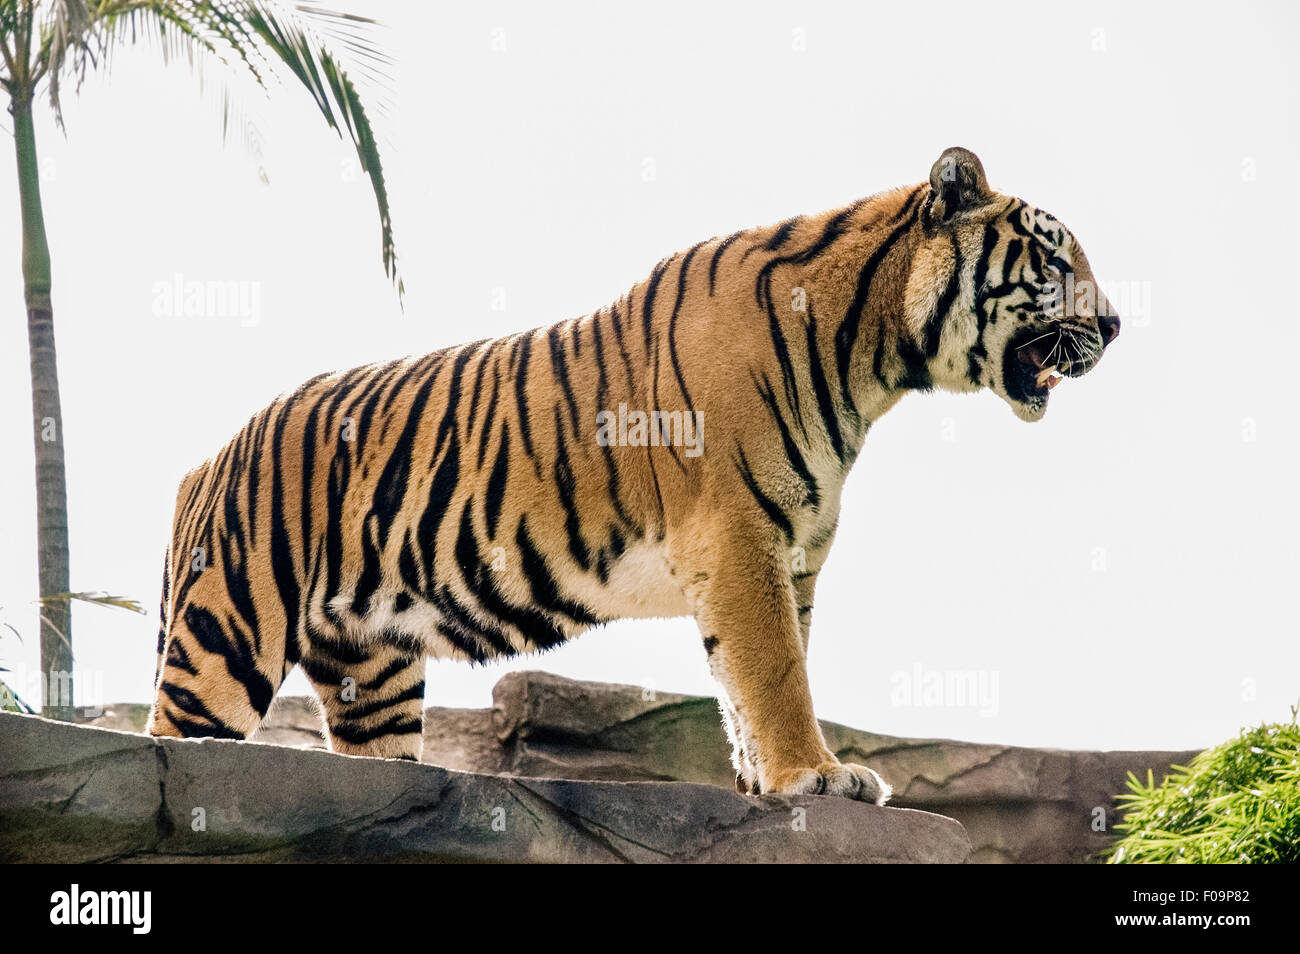 Image of a musculous roaring tiger in bright light Stock Photo